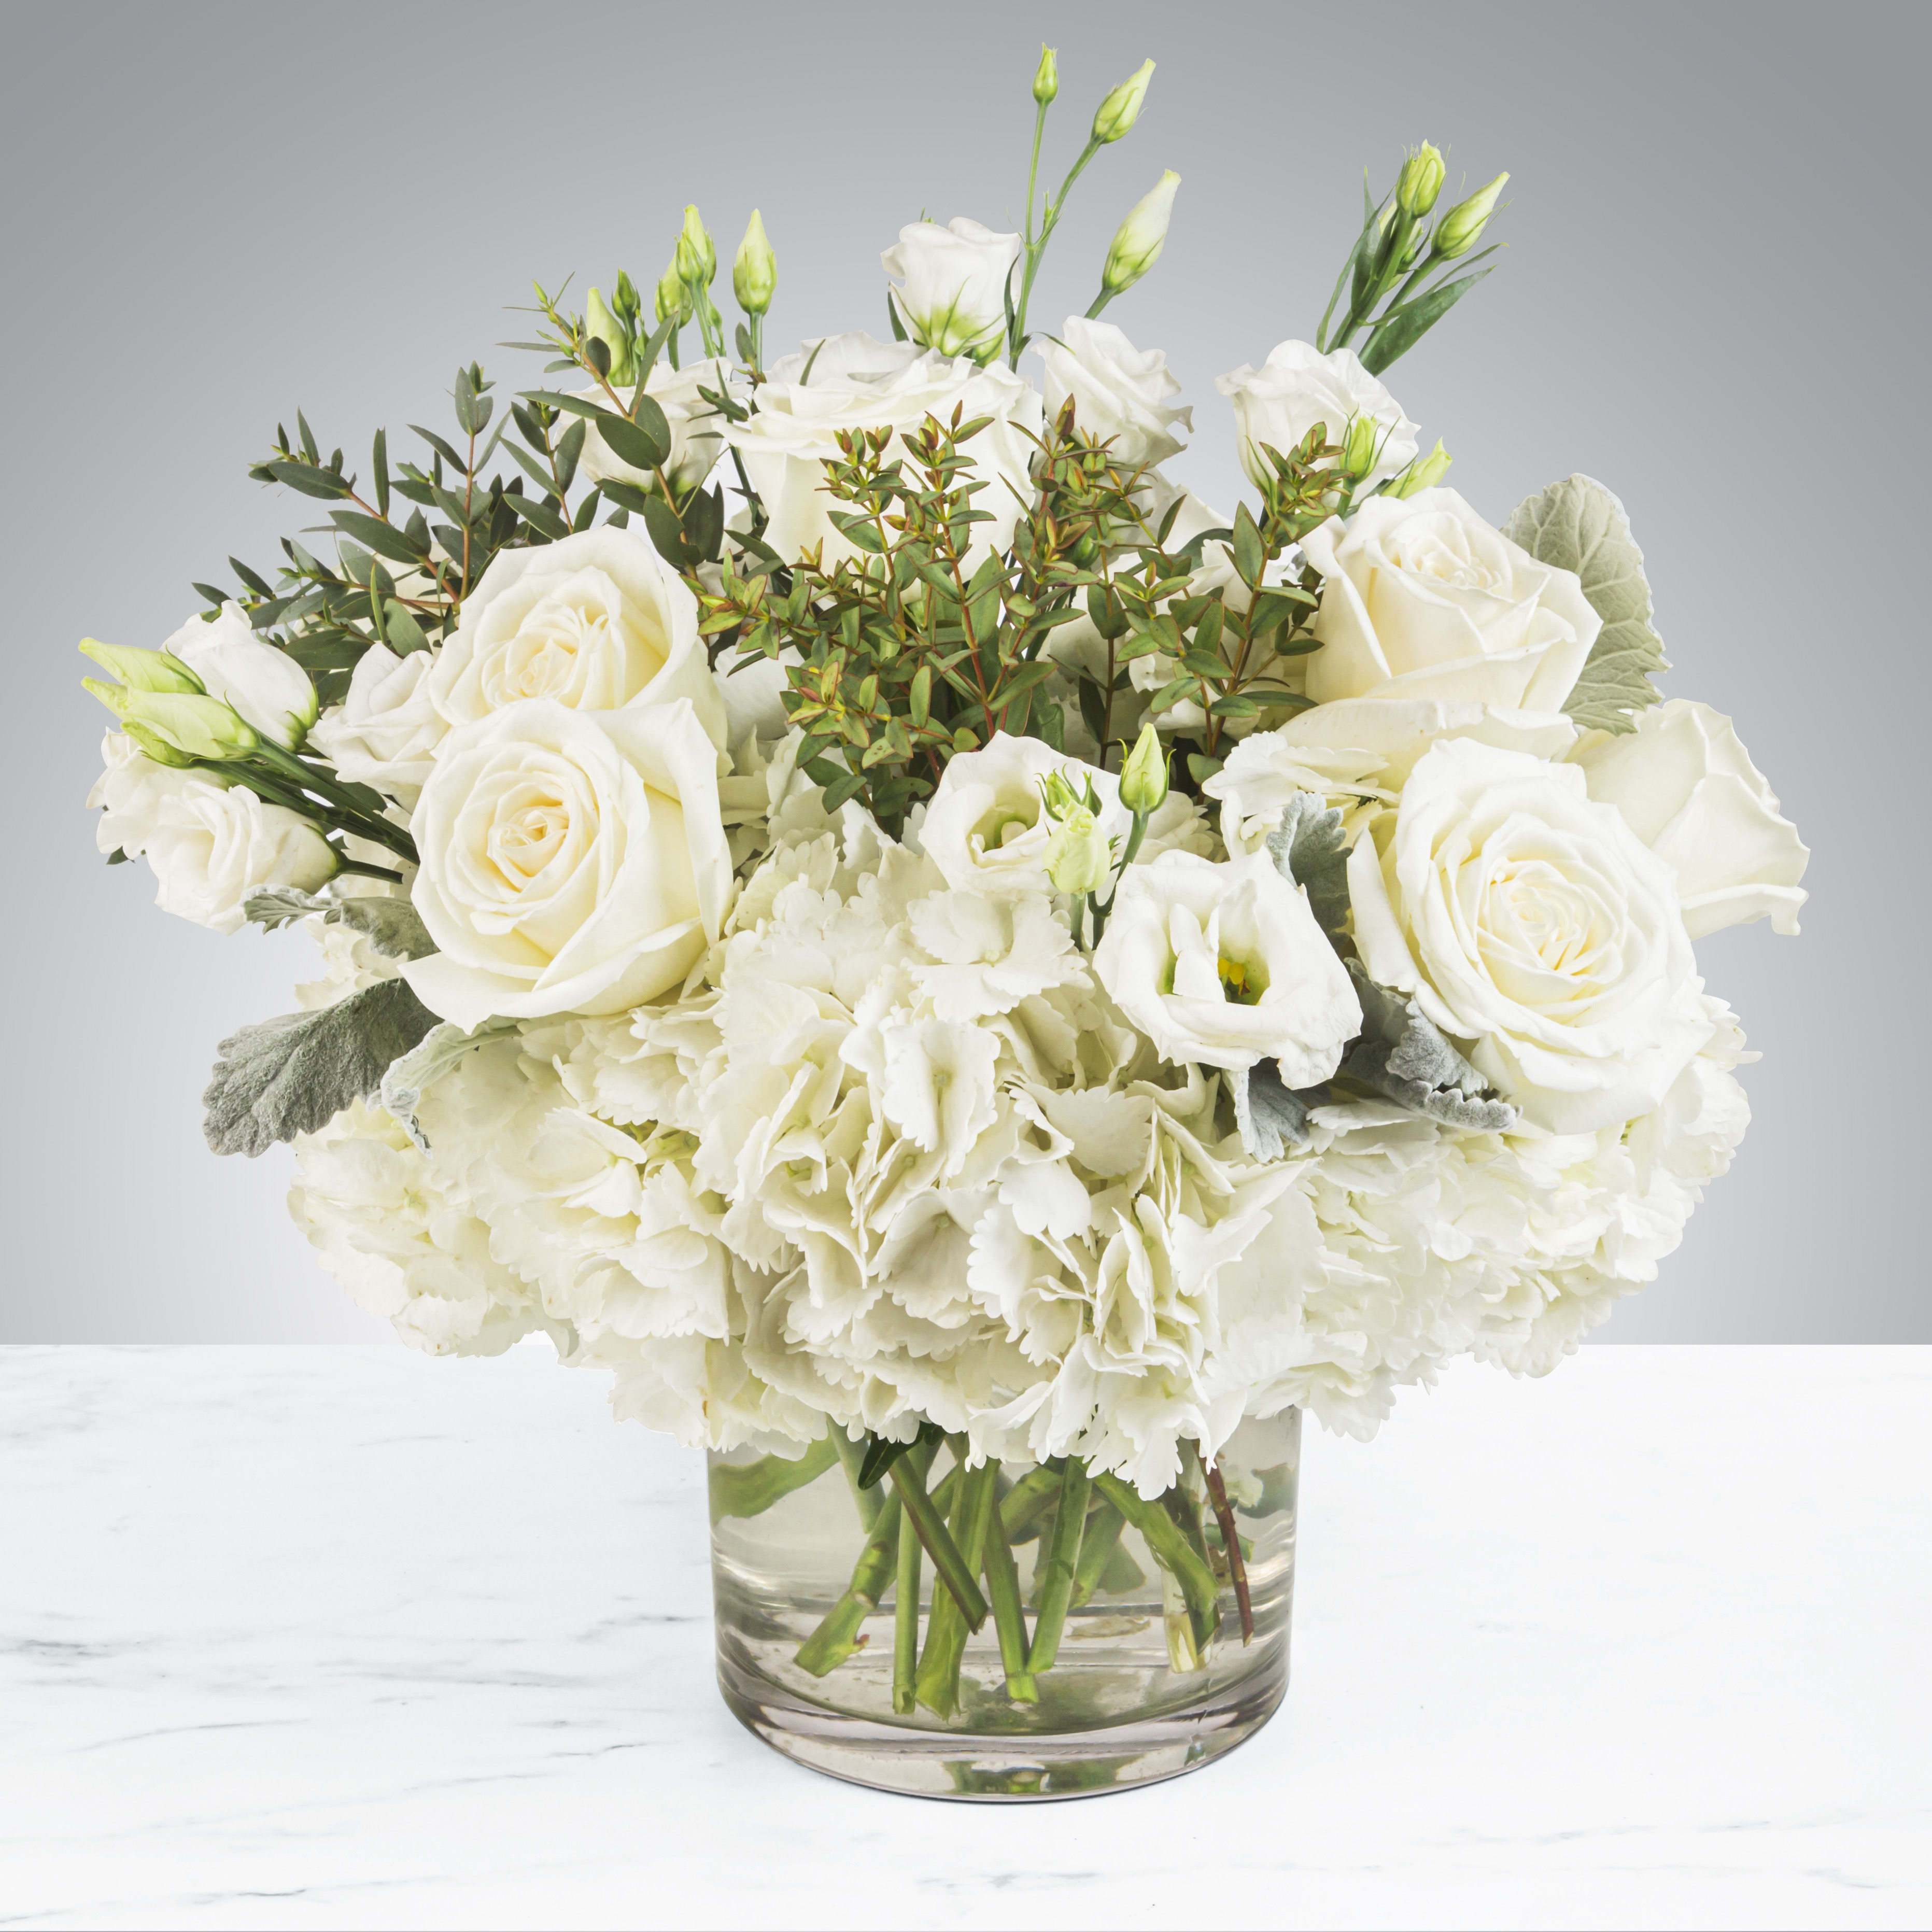 Cloud Nine  - New beginnings deserve flowers! This all white arrangement includes roses, lisianthus and hydrangeas. Cloud Nine is the perfect gift for celebrating a new year, a new baby, or a newly married couple.   APPROXIMATE DIMENSIONS 15&quot; W X 13&quot; H